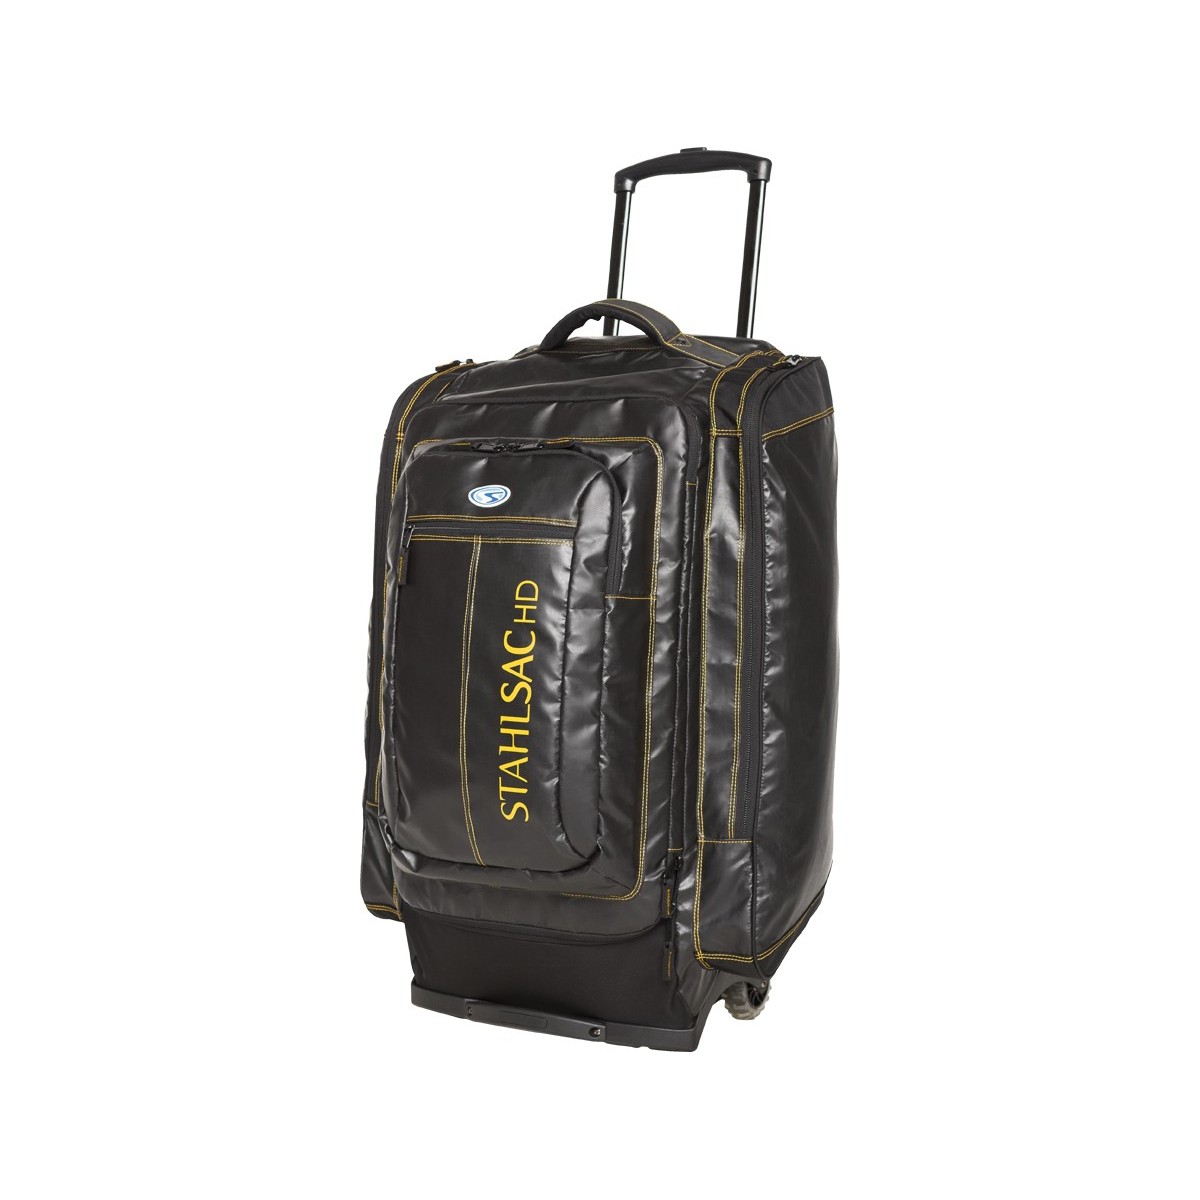 Stahlsac HD Caicos Cargo Pack Travel Bag - DiveThings